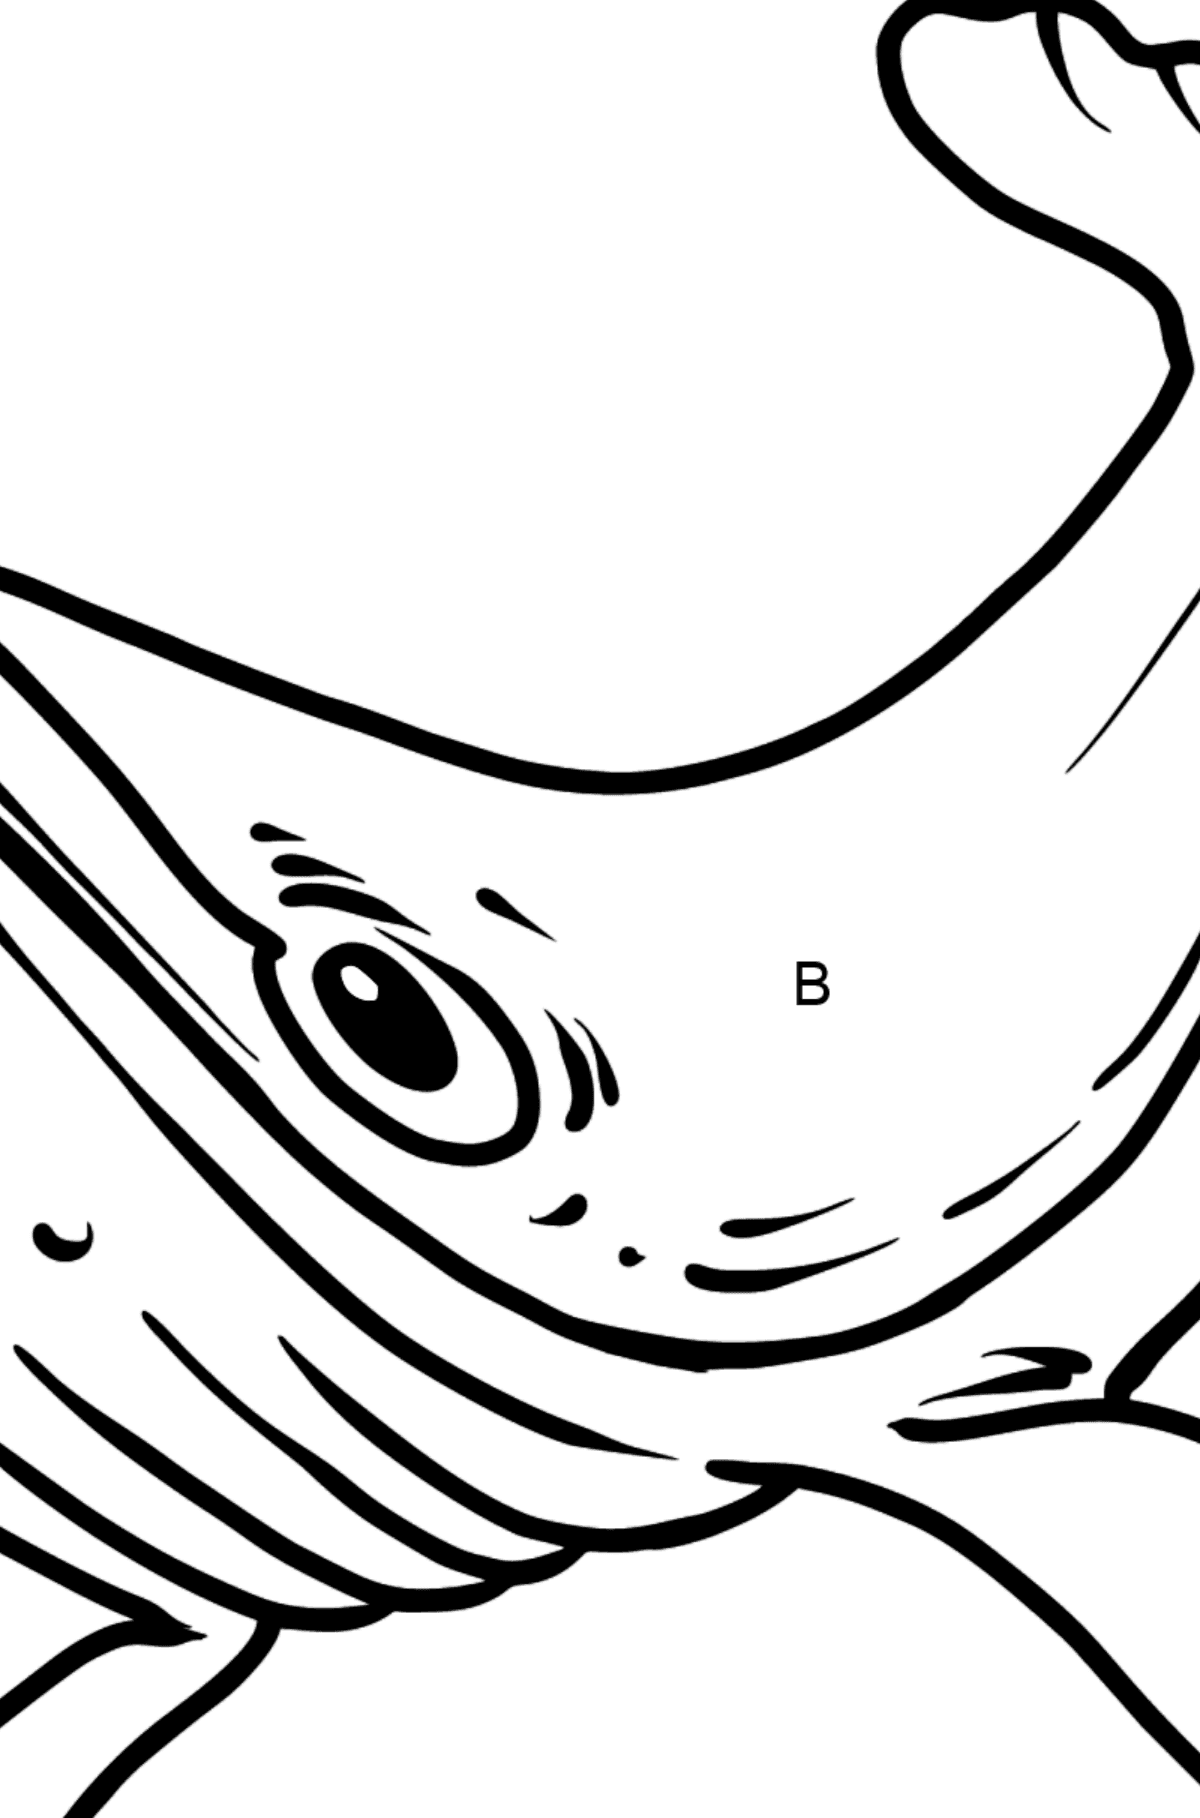 Whale coloring page - Coloring by Letters for Kids